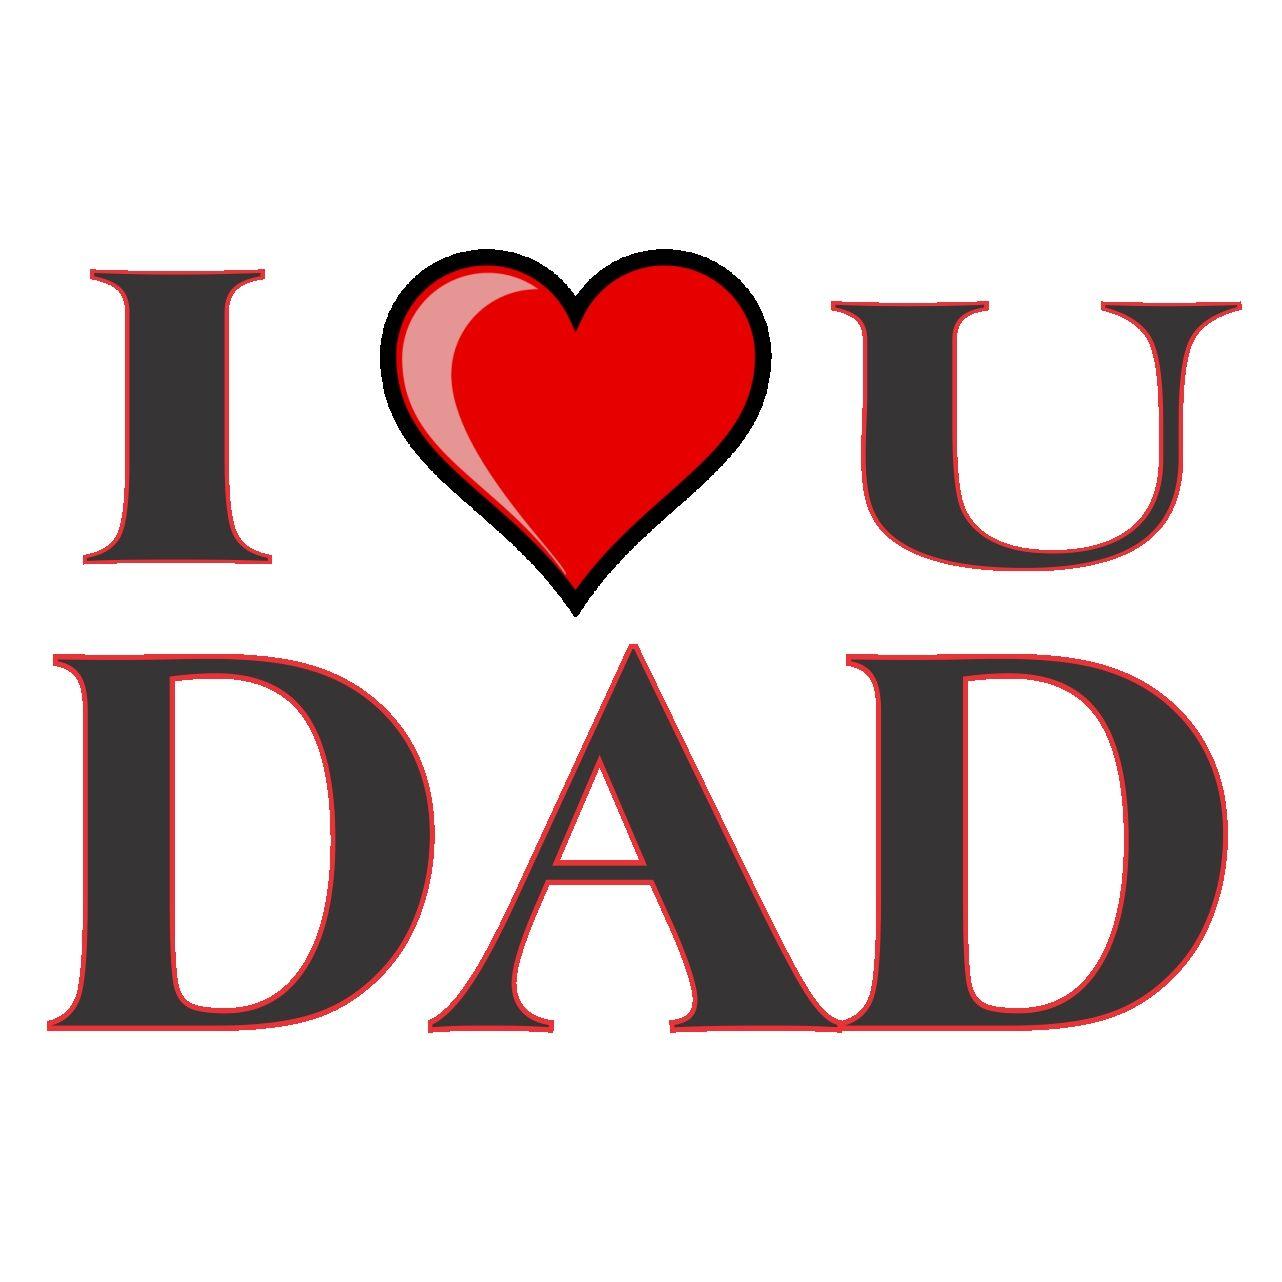 Wallpaper of love you dad Wallpaper of love you dad Download Download Wallpaper of love you dad. from the above display re. Happy fathers day wallpaper, Fathers day